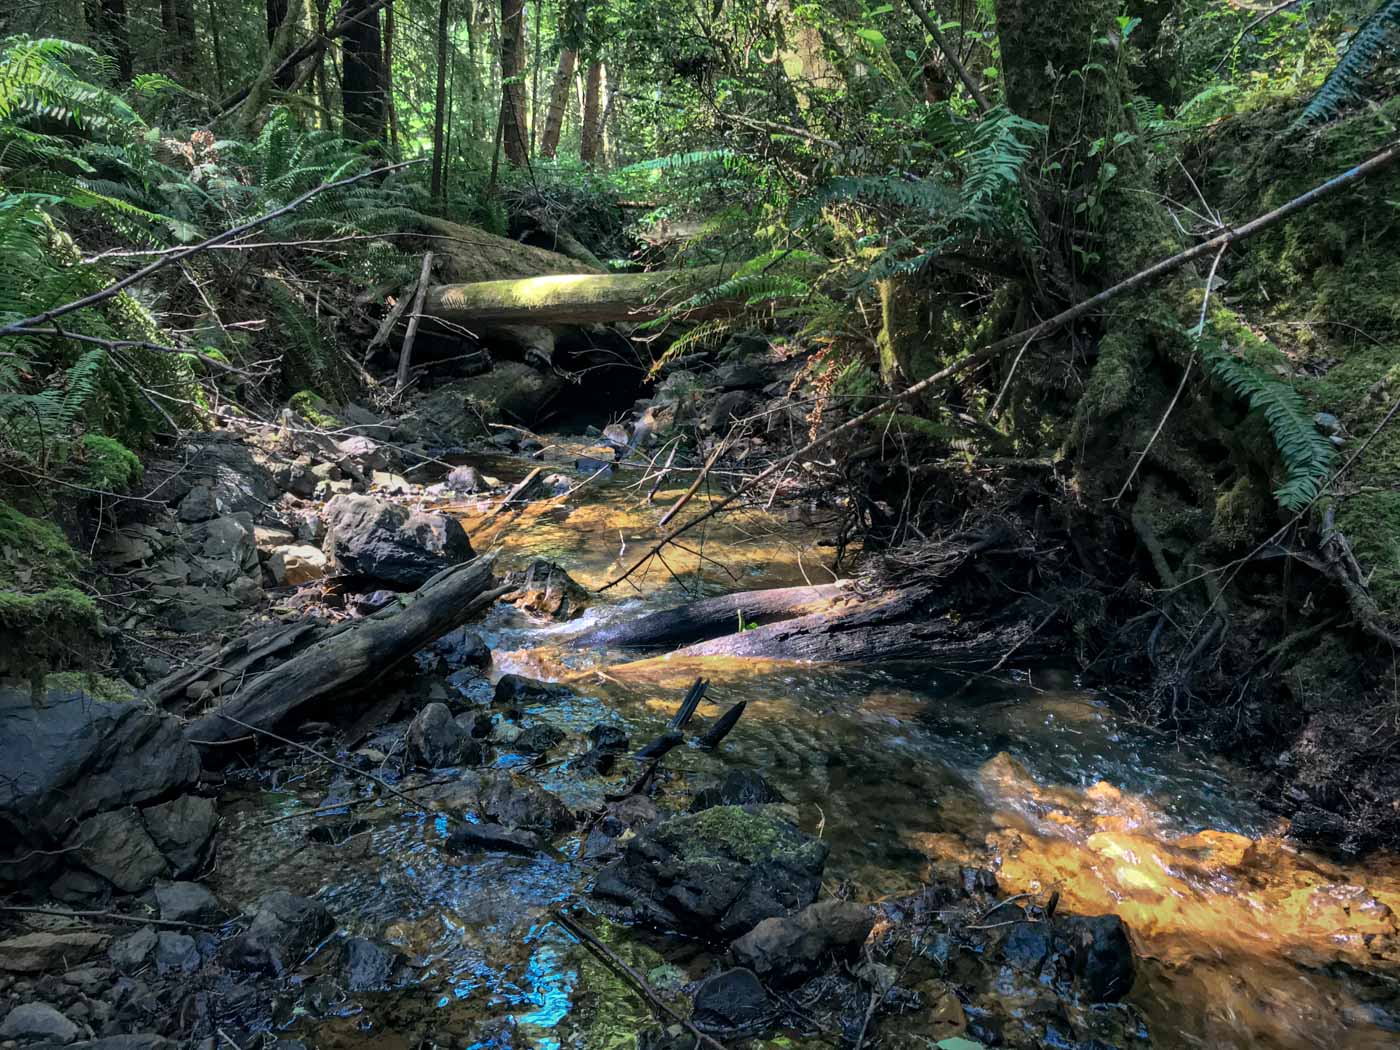 A mossy tree trunk crosses a light-dappled rocky stream running through the redwood forest on the League's Andersonia West property.